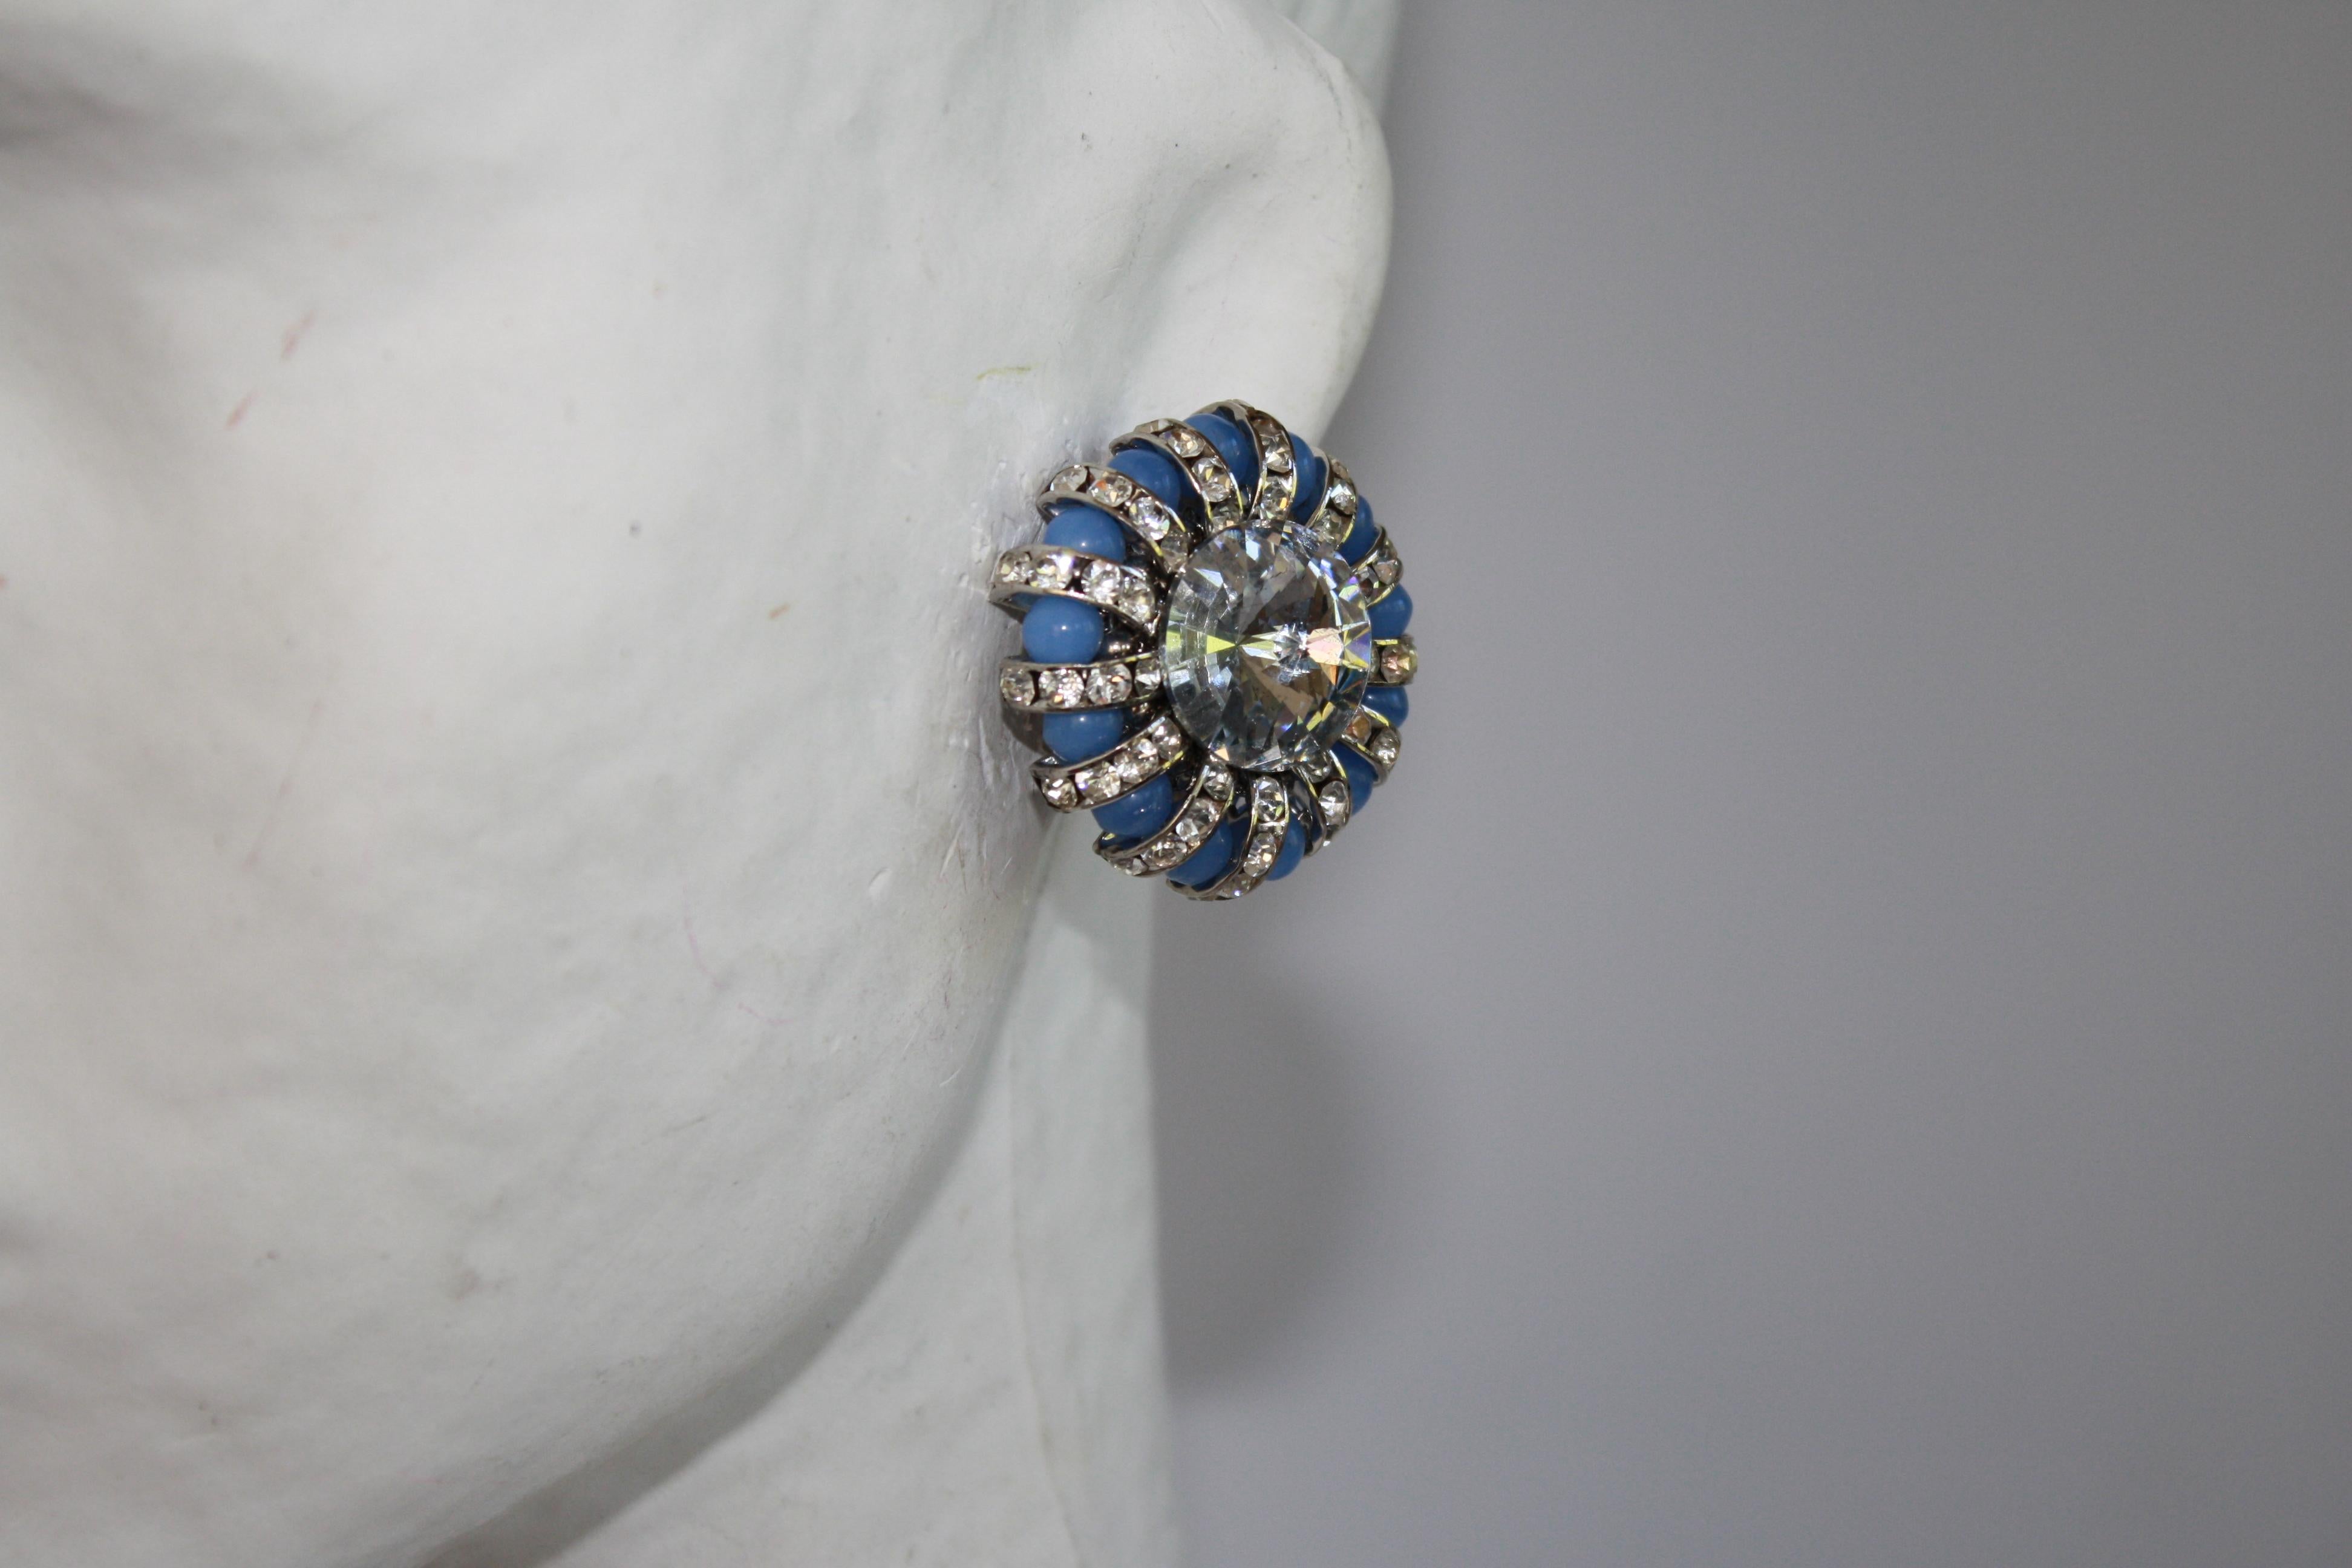 Swarovski crystal rondelles and handmade glass clip earrings from Francoise Montague.
